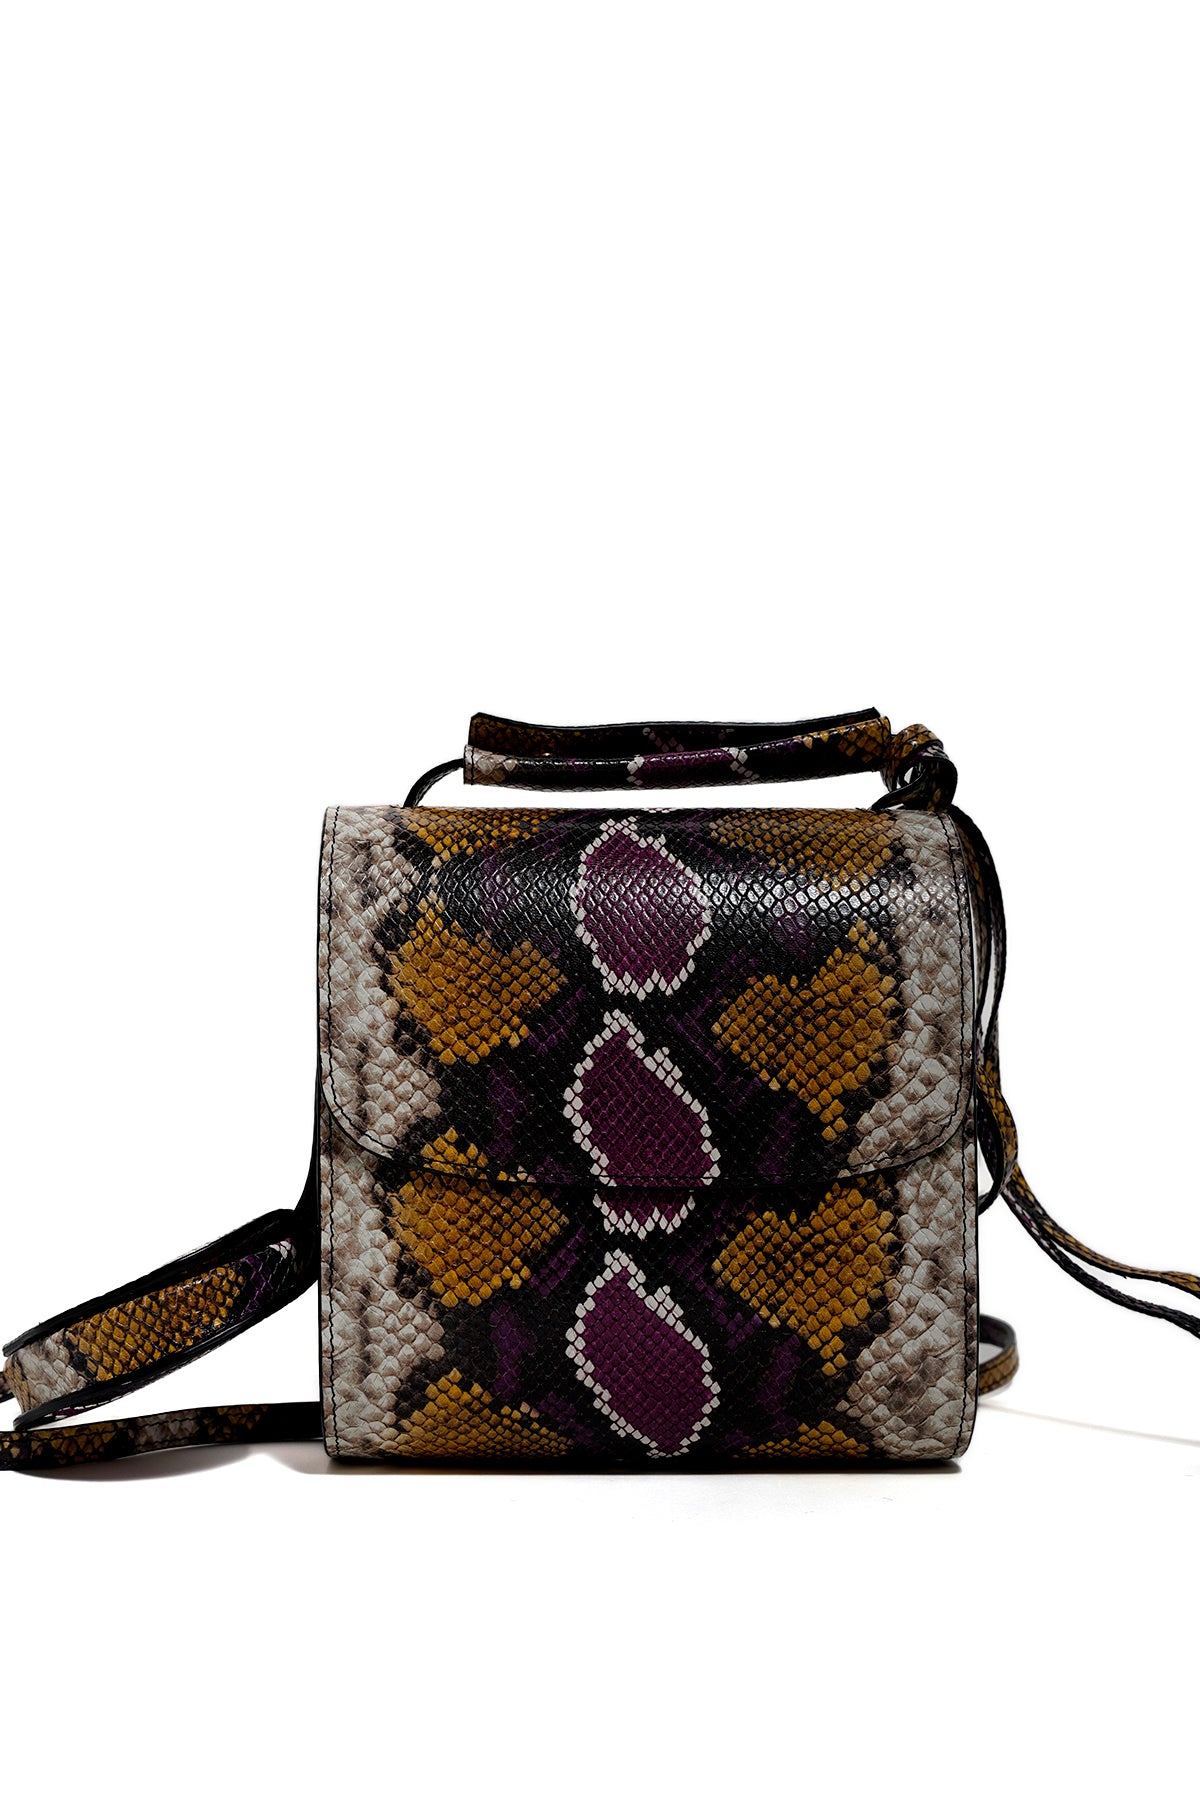 CLASSIC M'A BAG IN SNAKE PRINT LEATHER